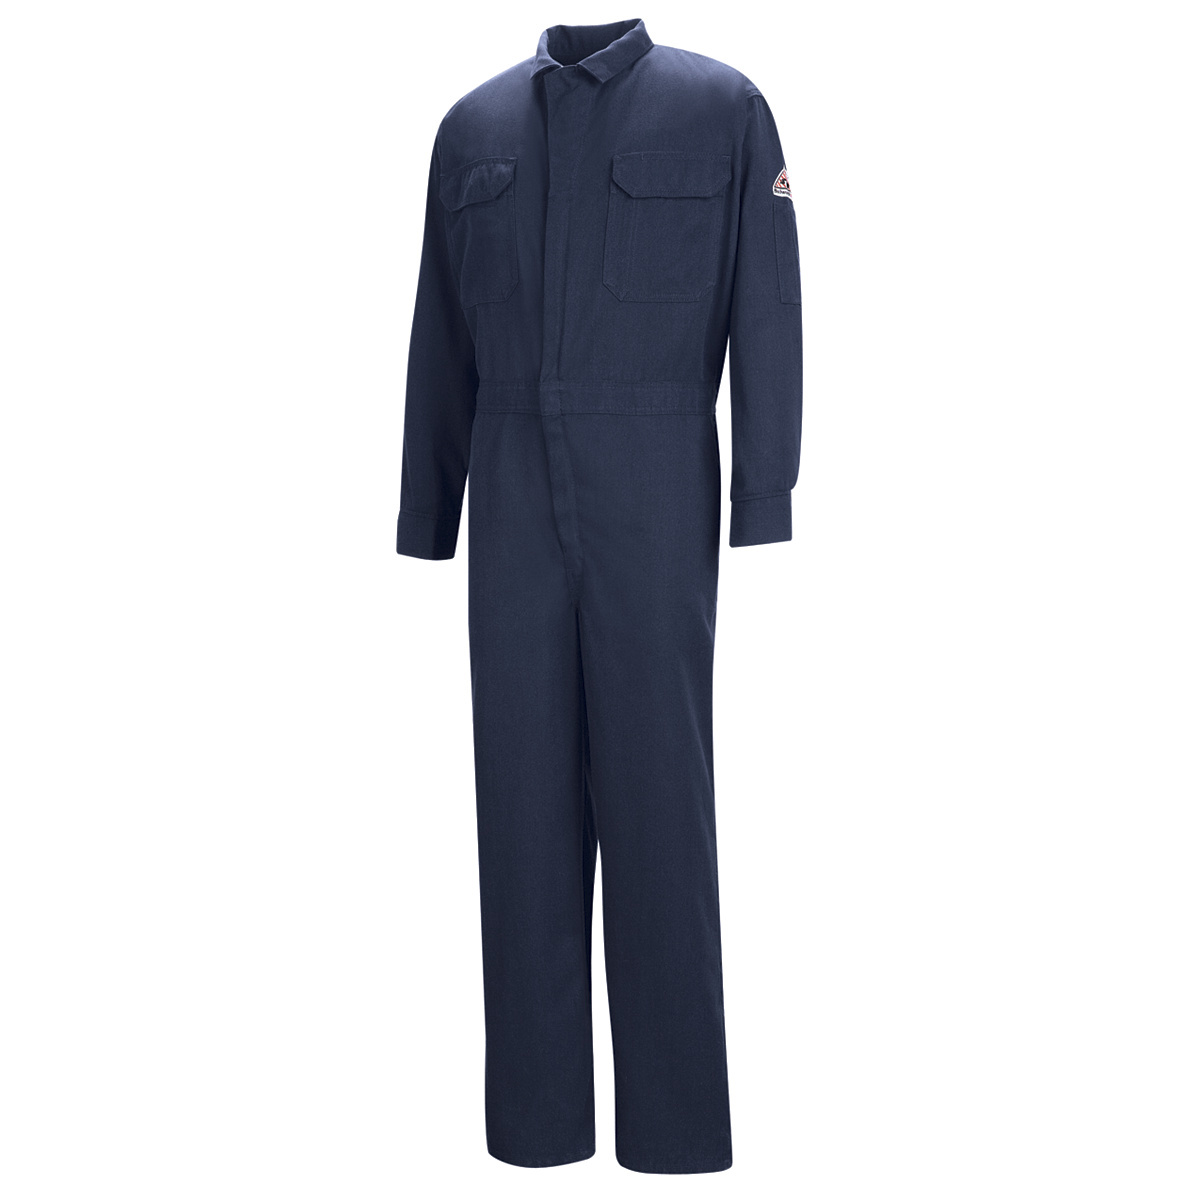 Bulwark® 50 Regular Navy Blue Modacrylic/Lyocell/Aramid Flame Resistant Coveralls With Zipper Front Closure